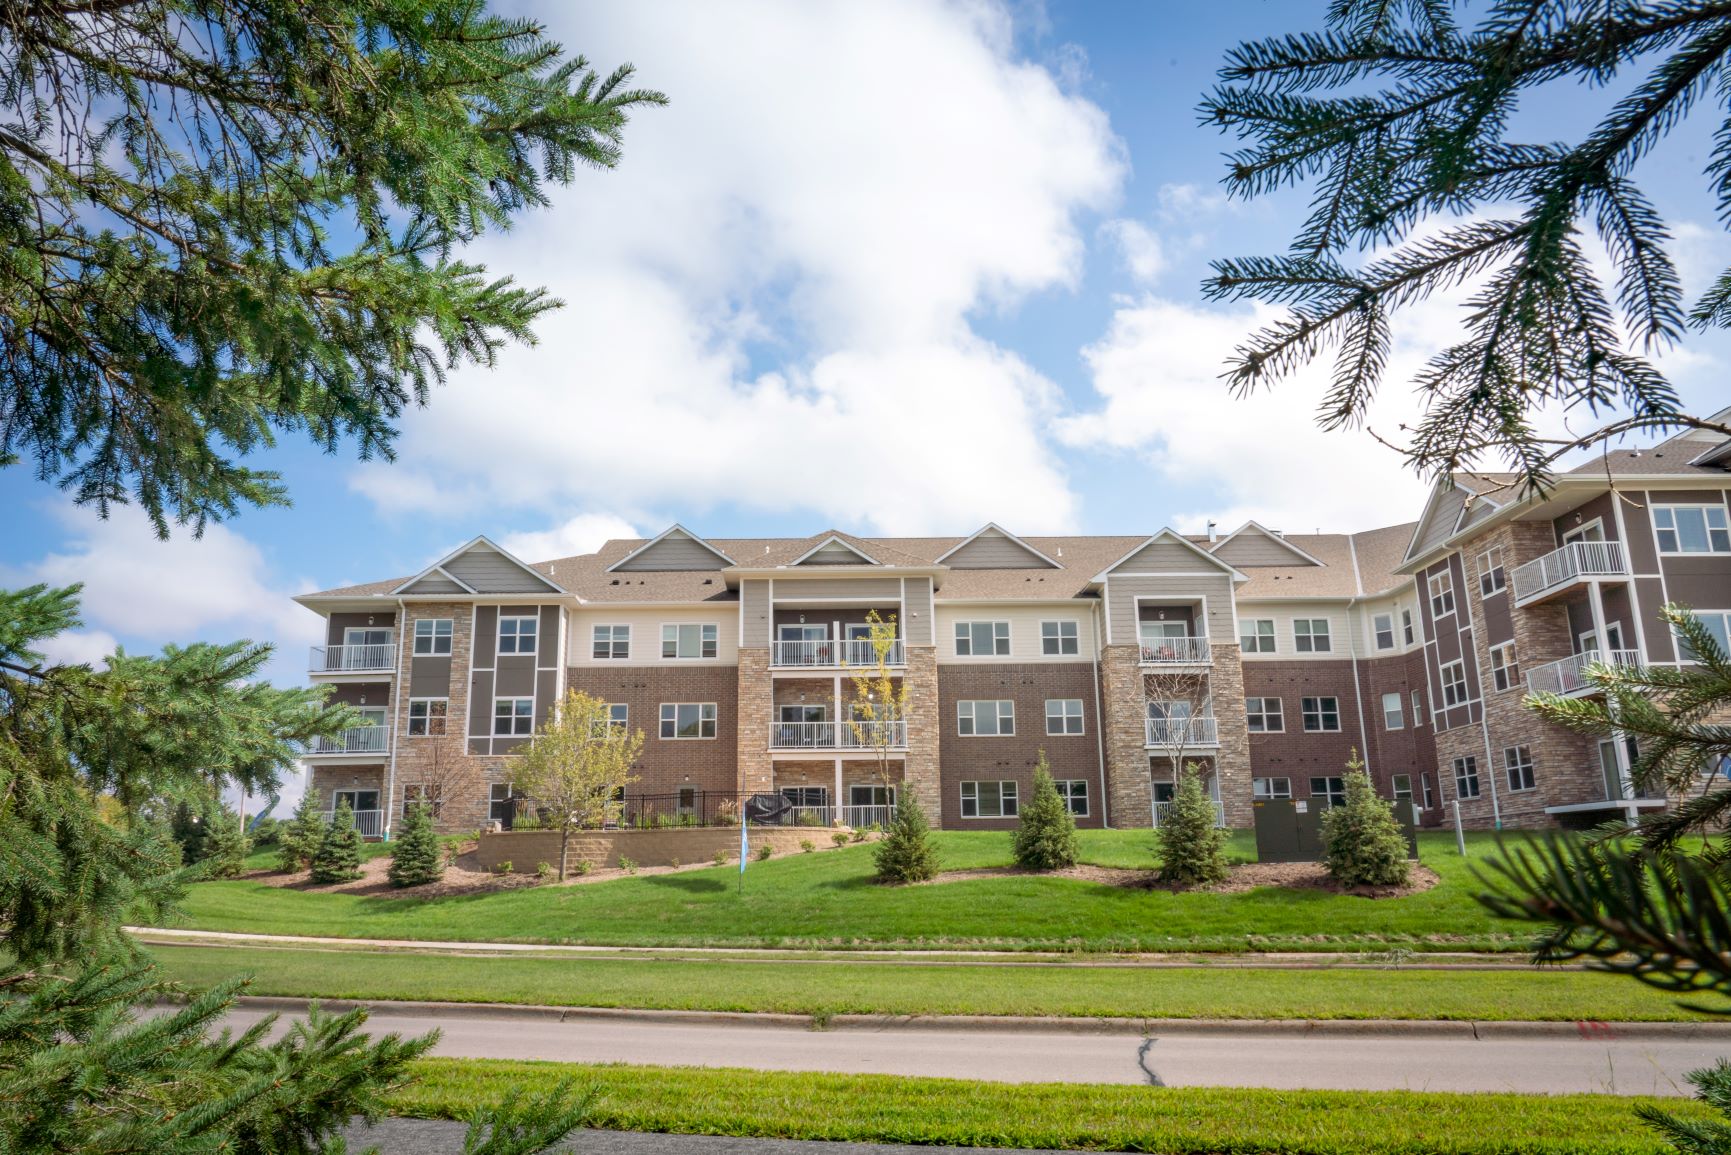 We invite you to a newly designed senior living community. We foster an at-home atmosphere and provide all the amenities and services you can imagine for a worry-free lifestyle.